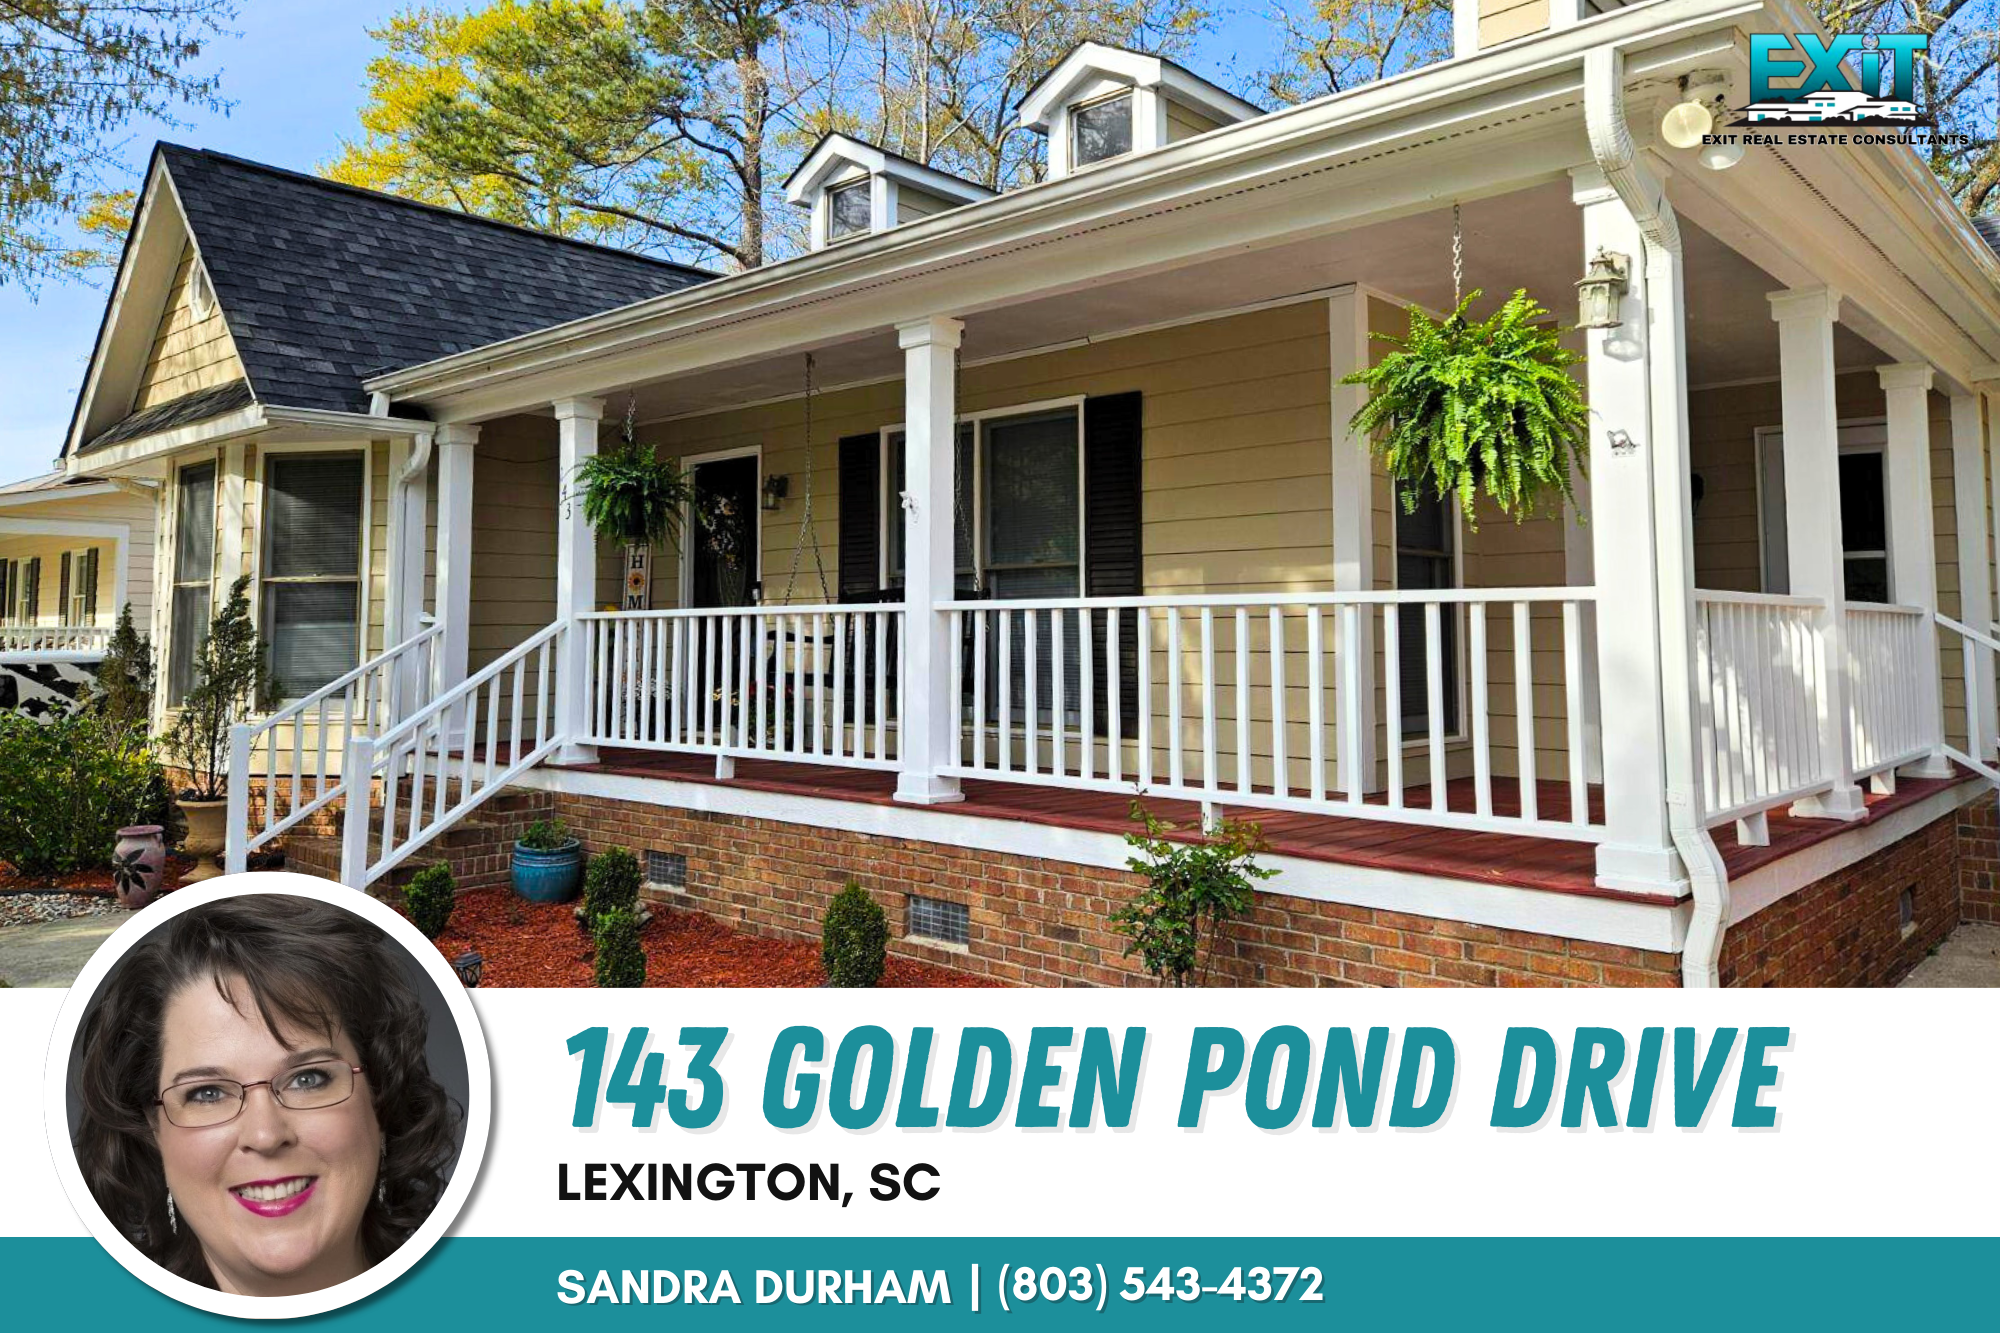 Just listed in Golden Pond - Lexington